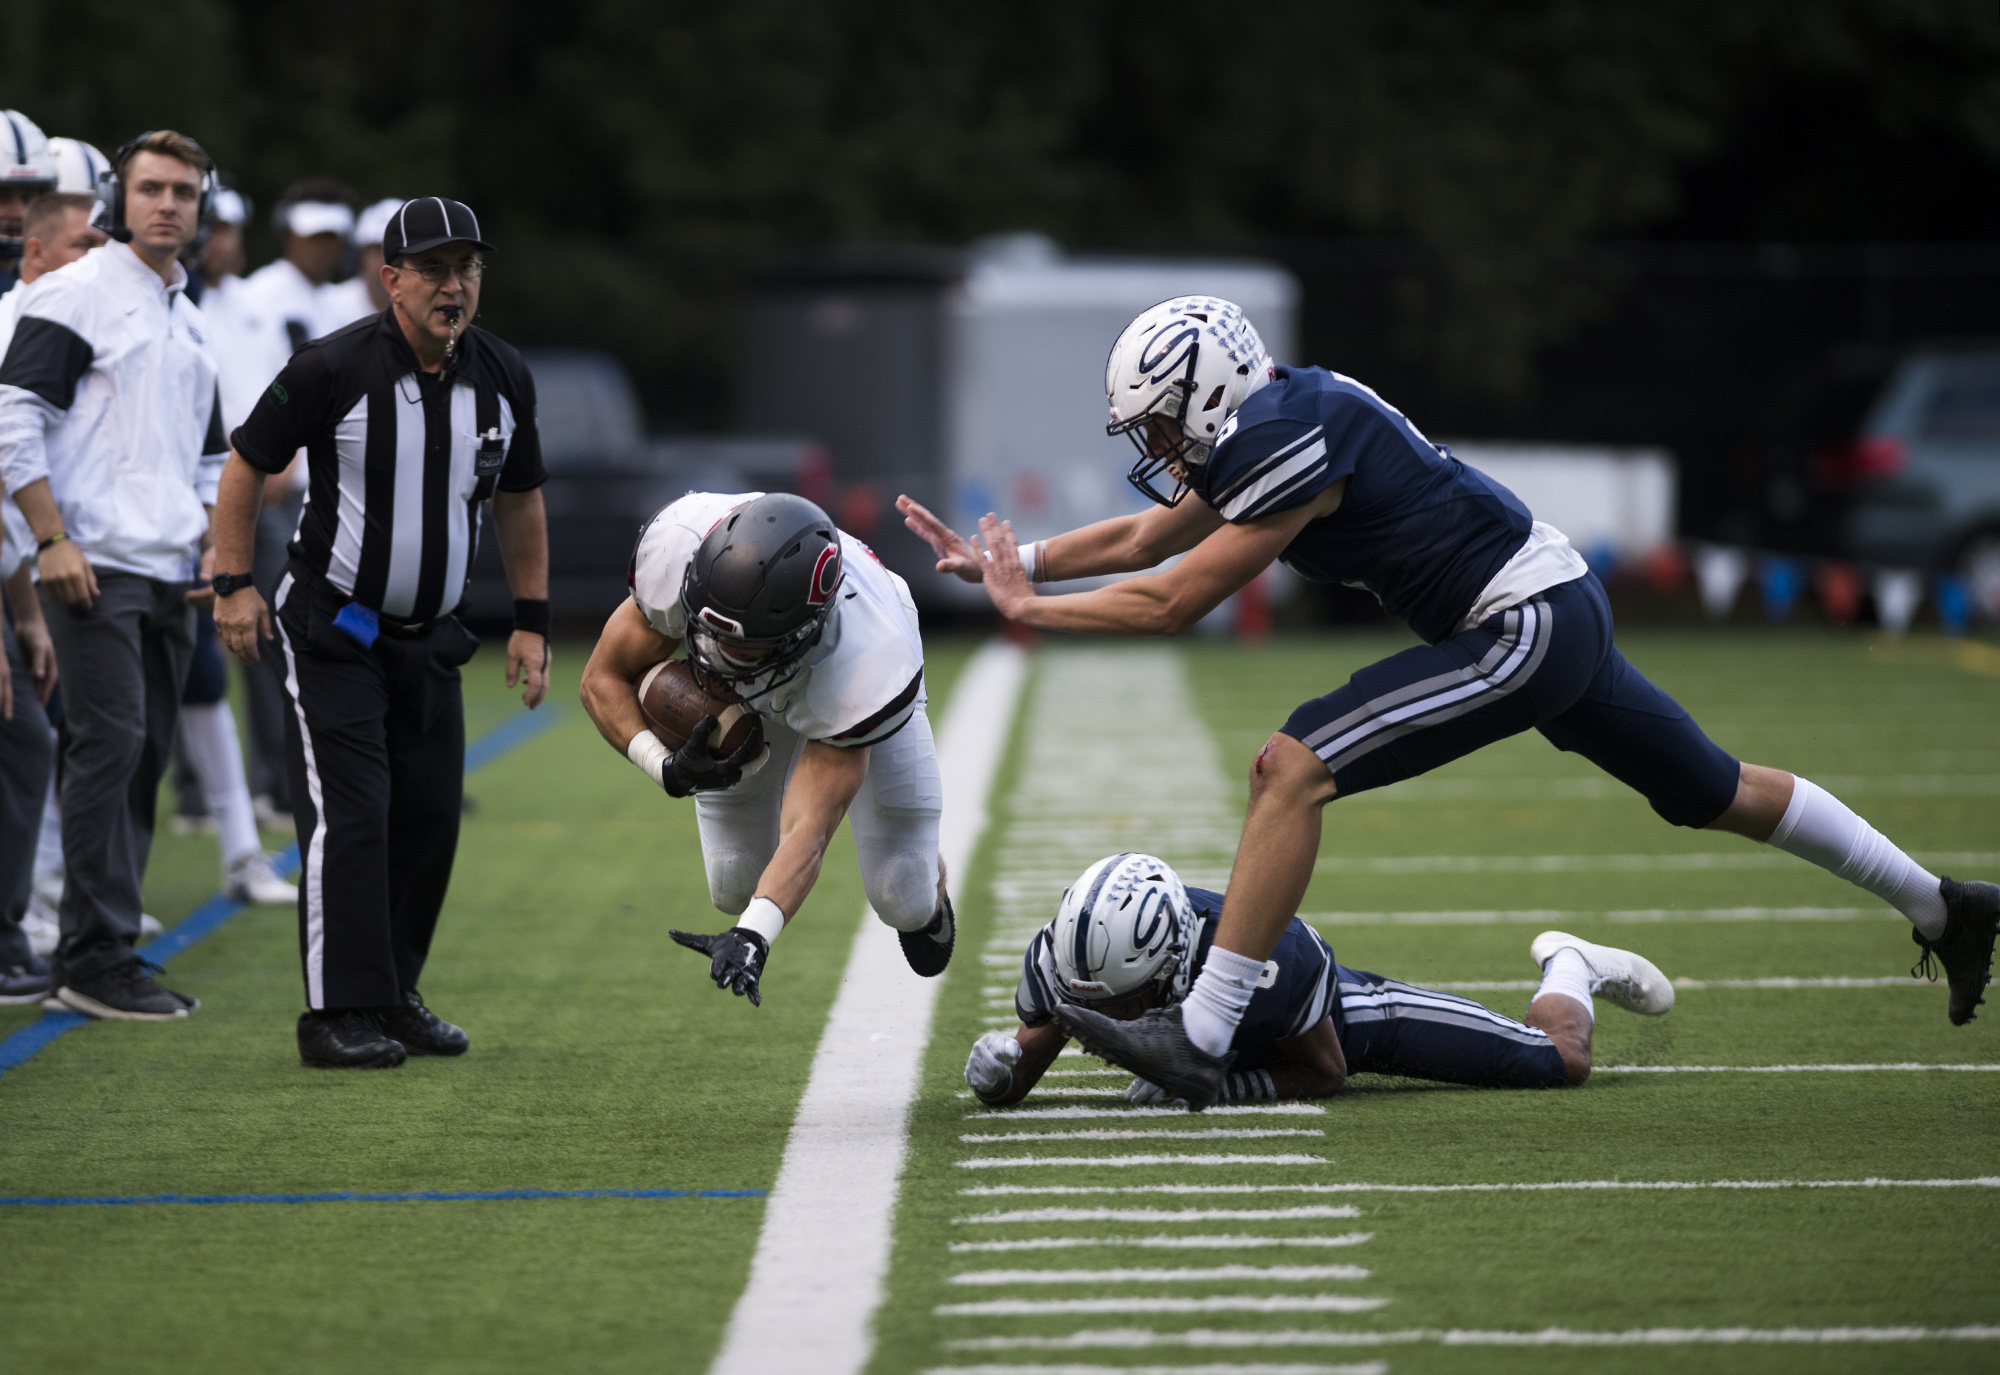 Skyview's Tavis Pinkney (6), center, and Chad Eigsti (5) force Camas' Will Schultz (37) out of bounds during Friday night's game Kiggins Bowl in Vancouver on Oct. 6, 2017. Camas defeated Skyview 38-20.